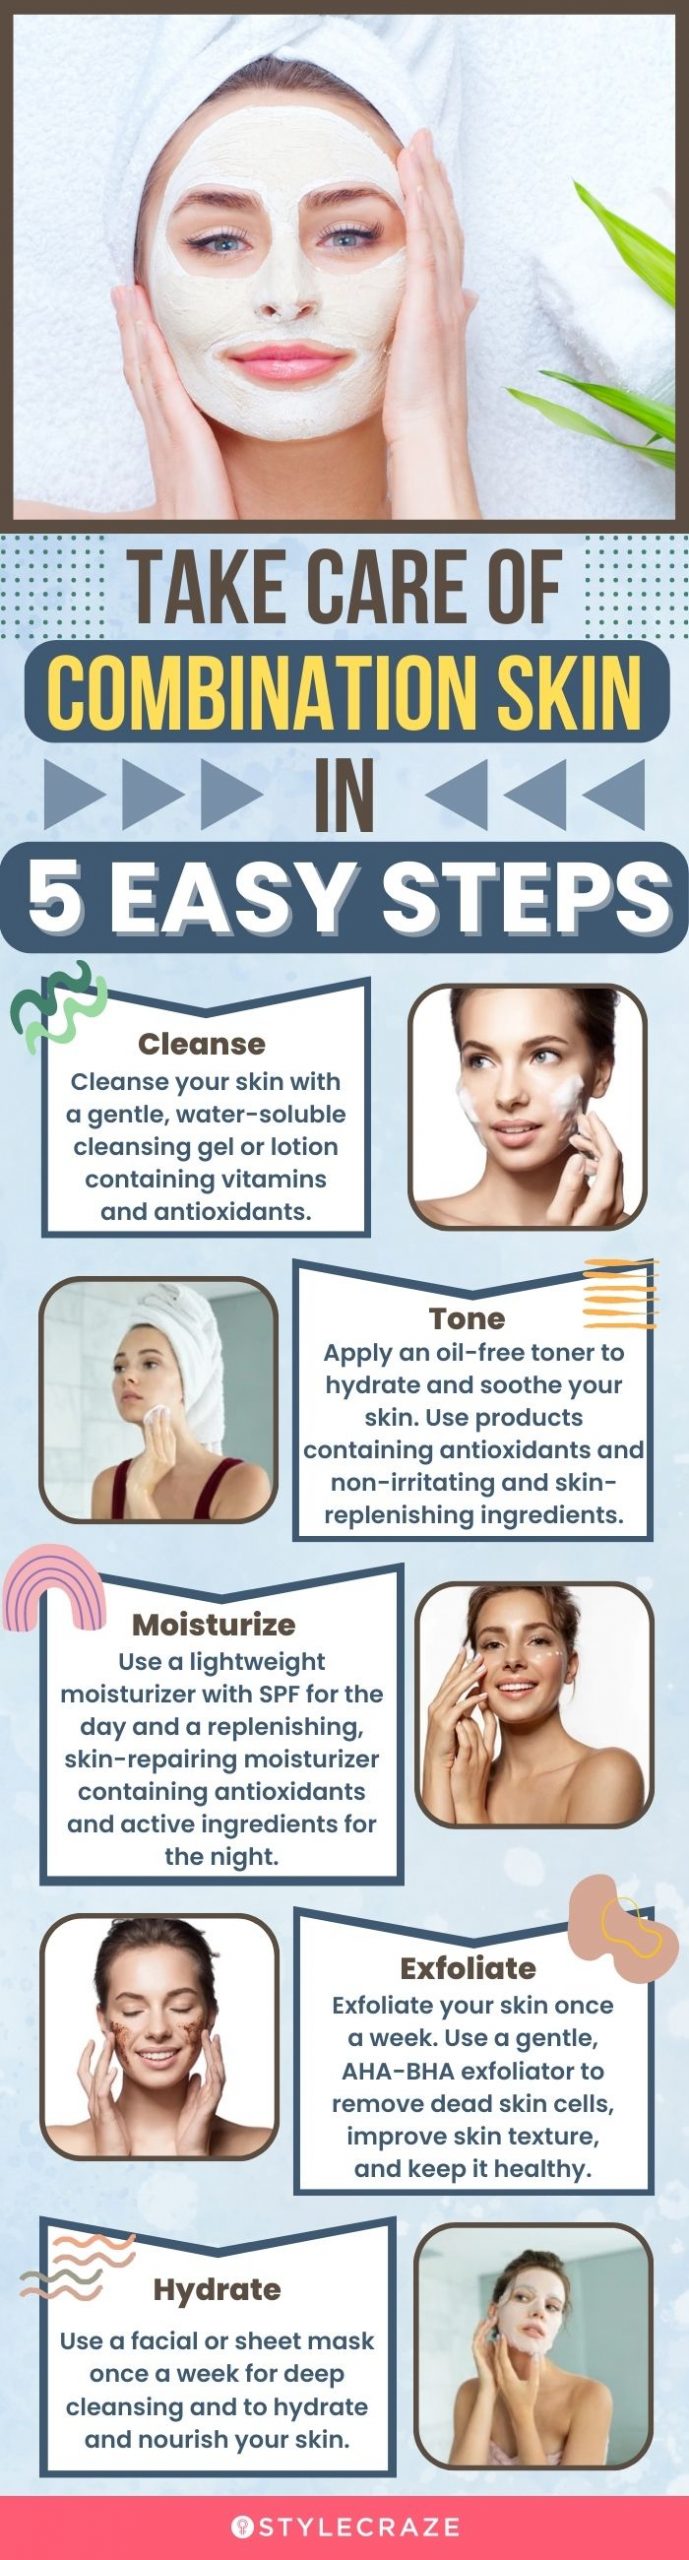 take care of combination skin in 5 easy steps (infographic)